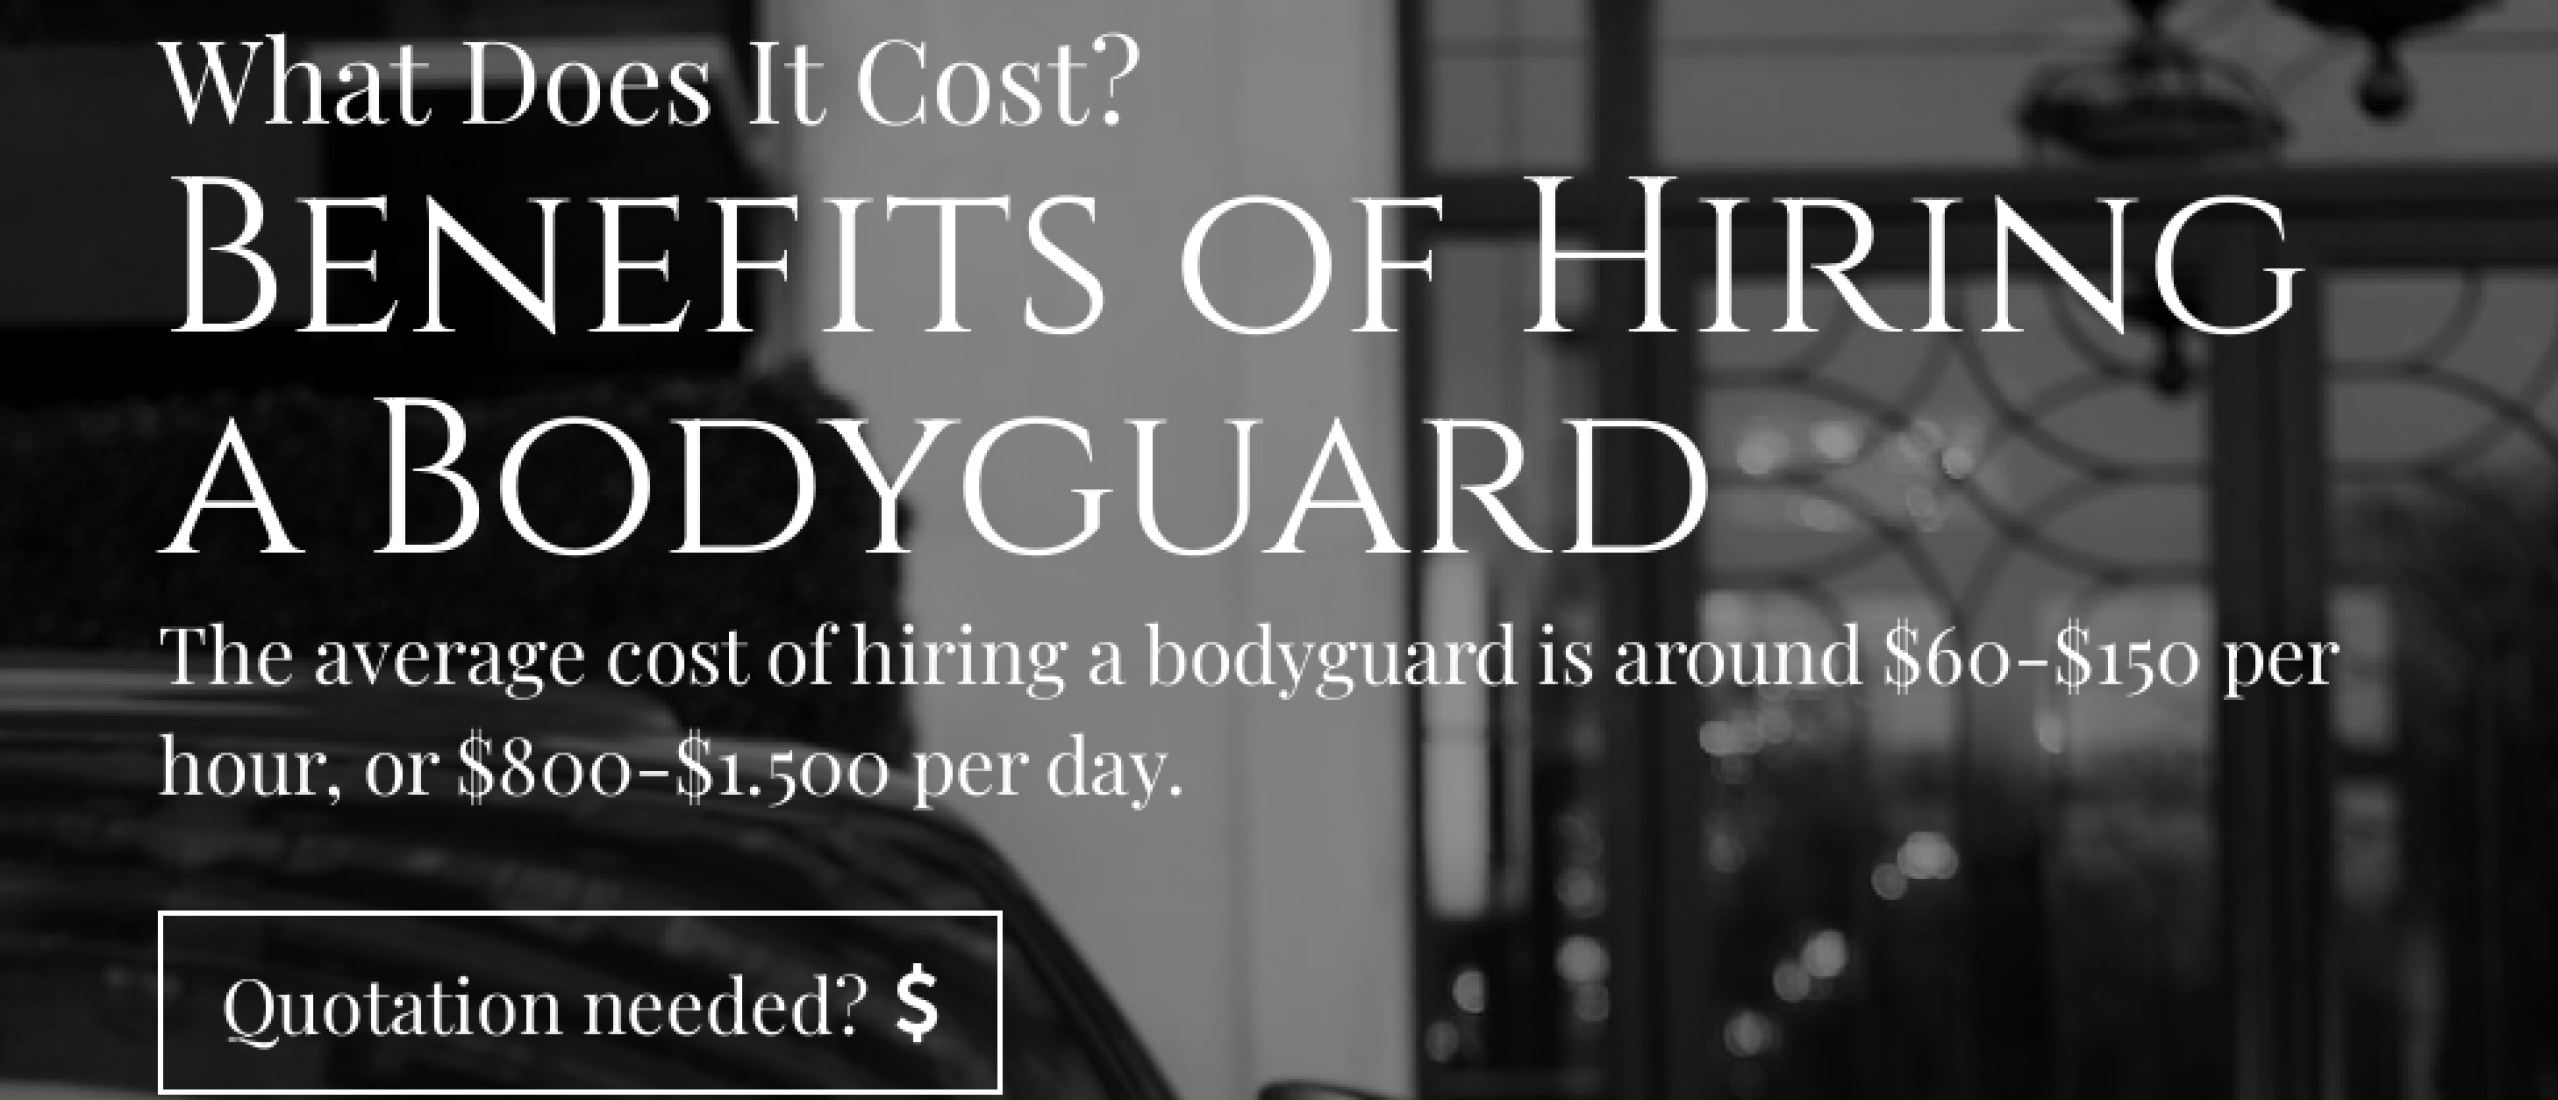 How much does it cost to hire a bodyguard